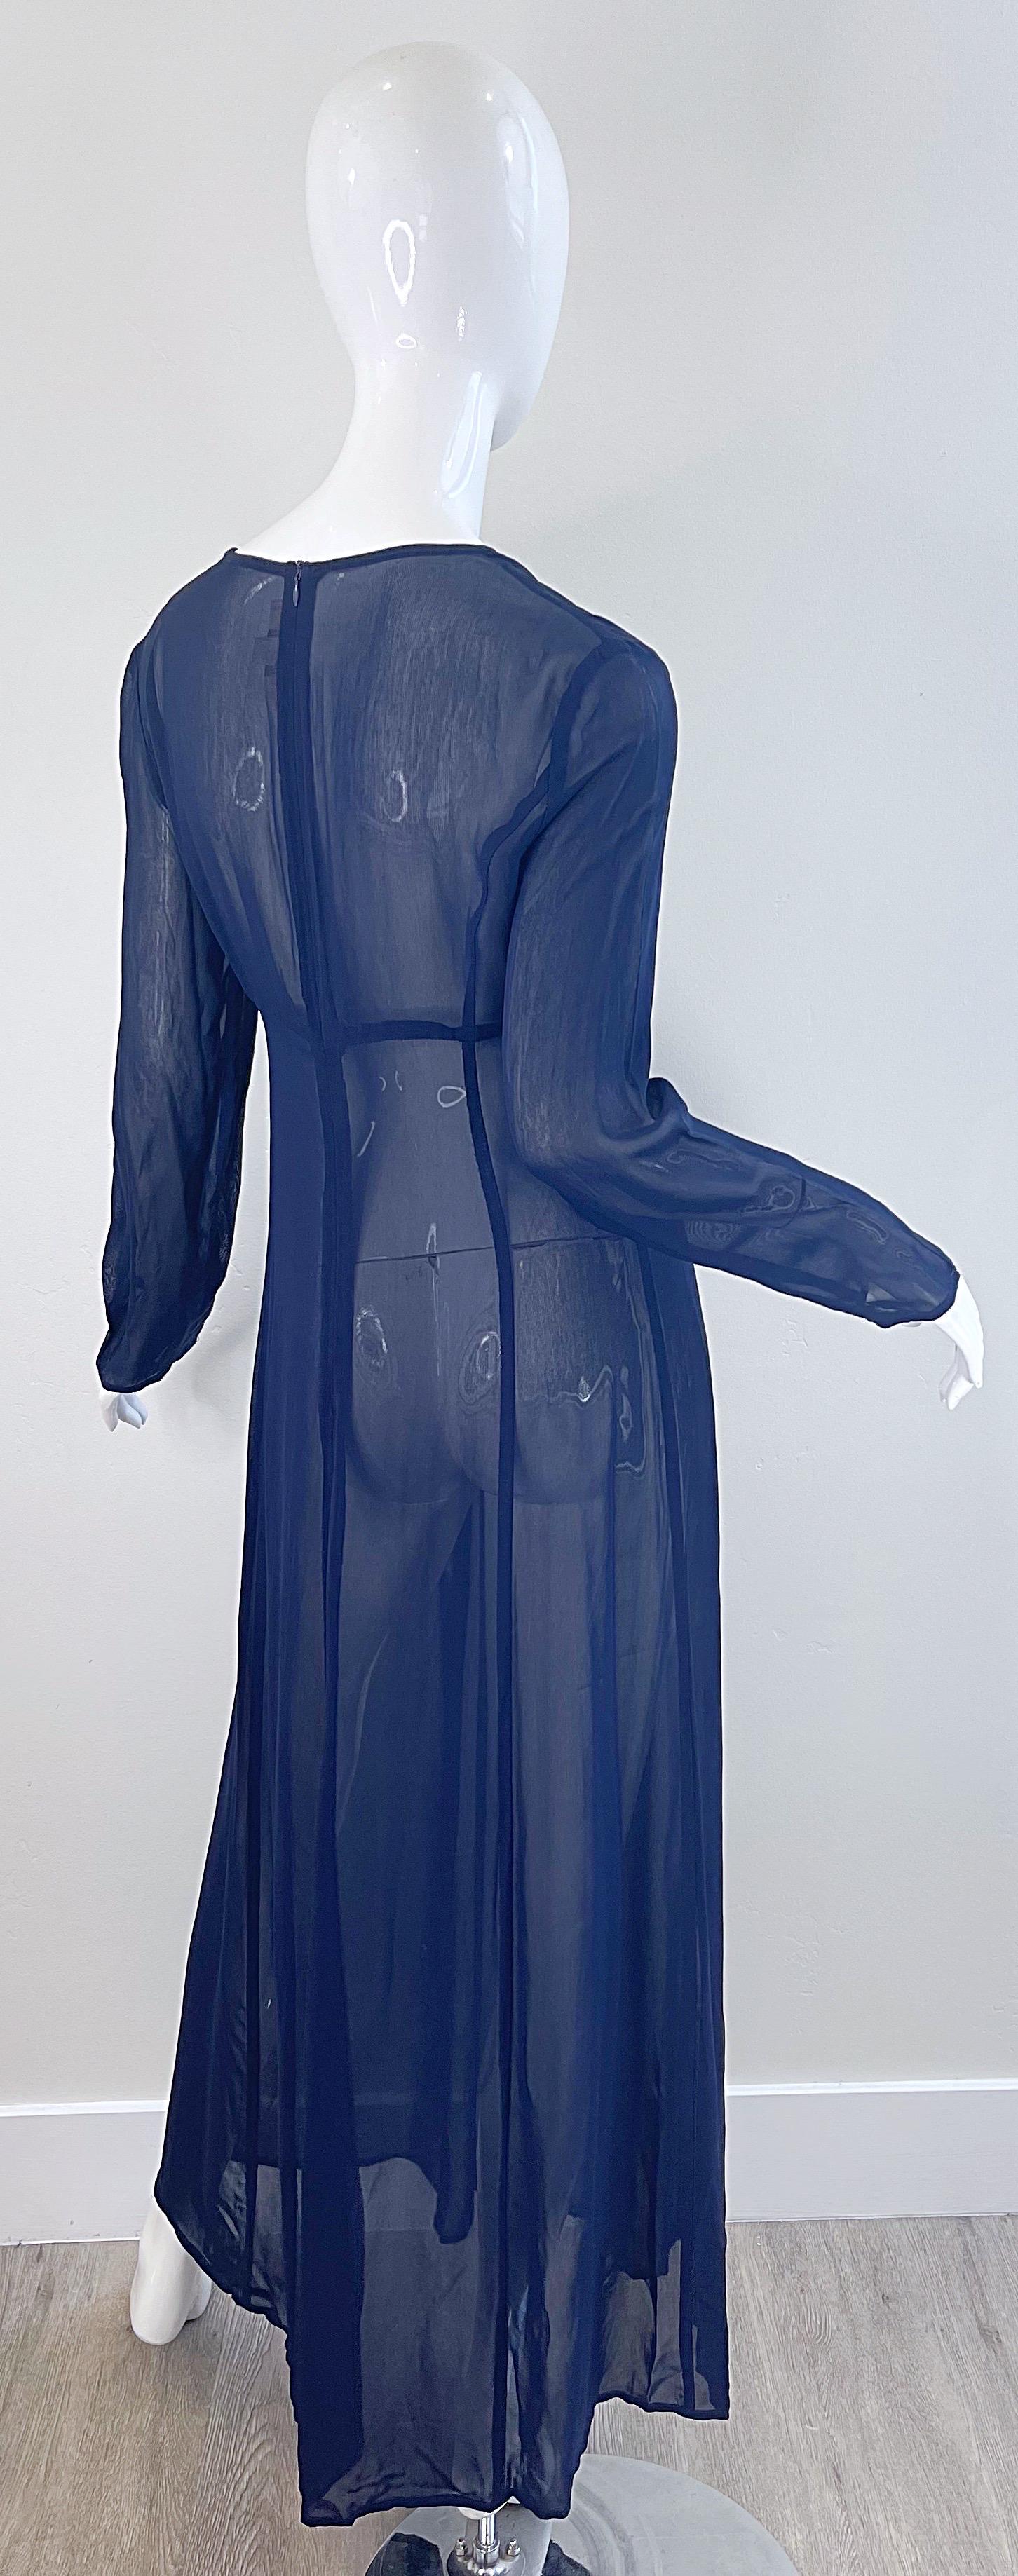 NWT 1990s I Magnin Size 10 Sheer Navy Blue Long Sleeve Vintage 90s Maxi Dress For Sale 3